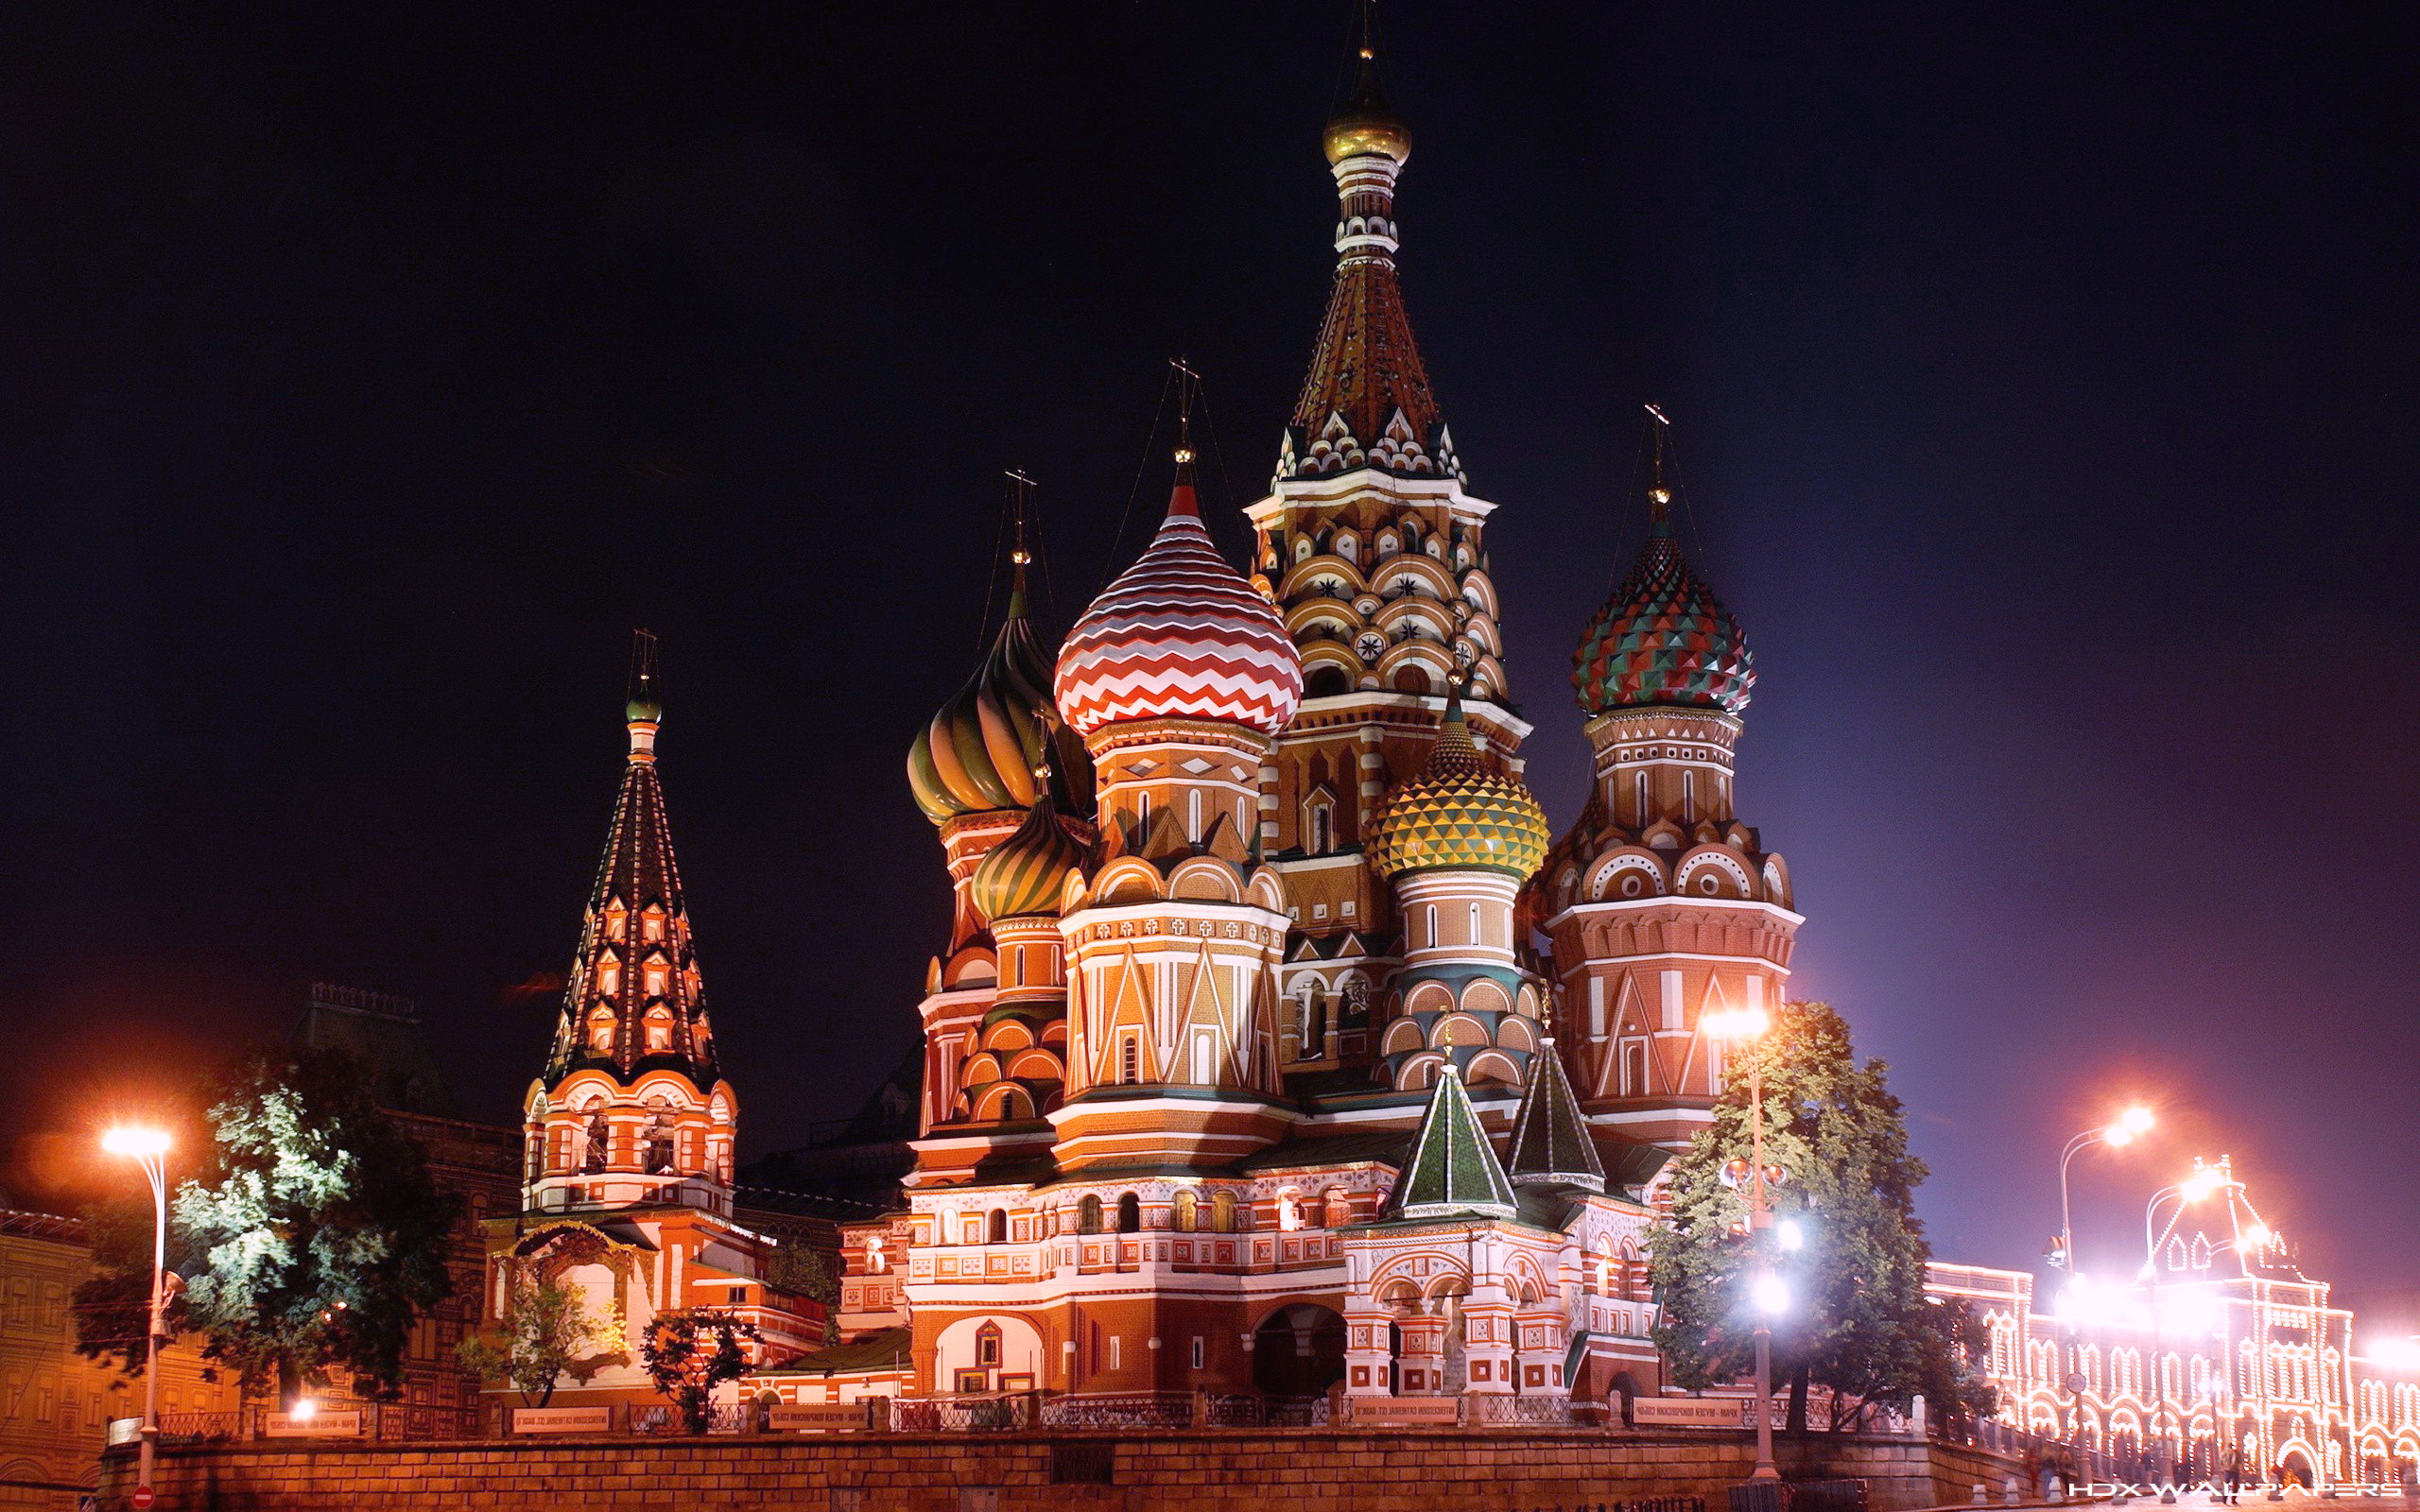 Saint Basil's Cathedral, Moscow background wallpaper, Picture-perfect view, Desktop wallpaper, 2560x1600 HD Desktop